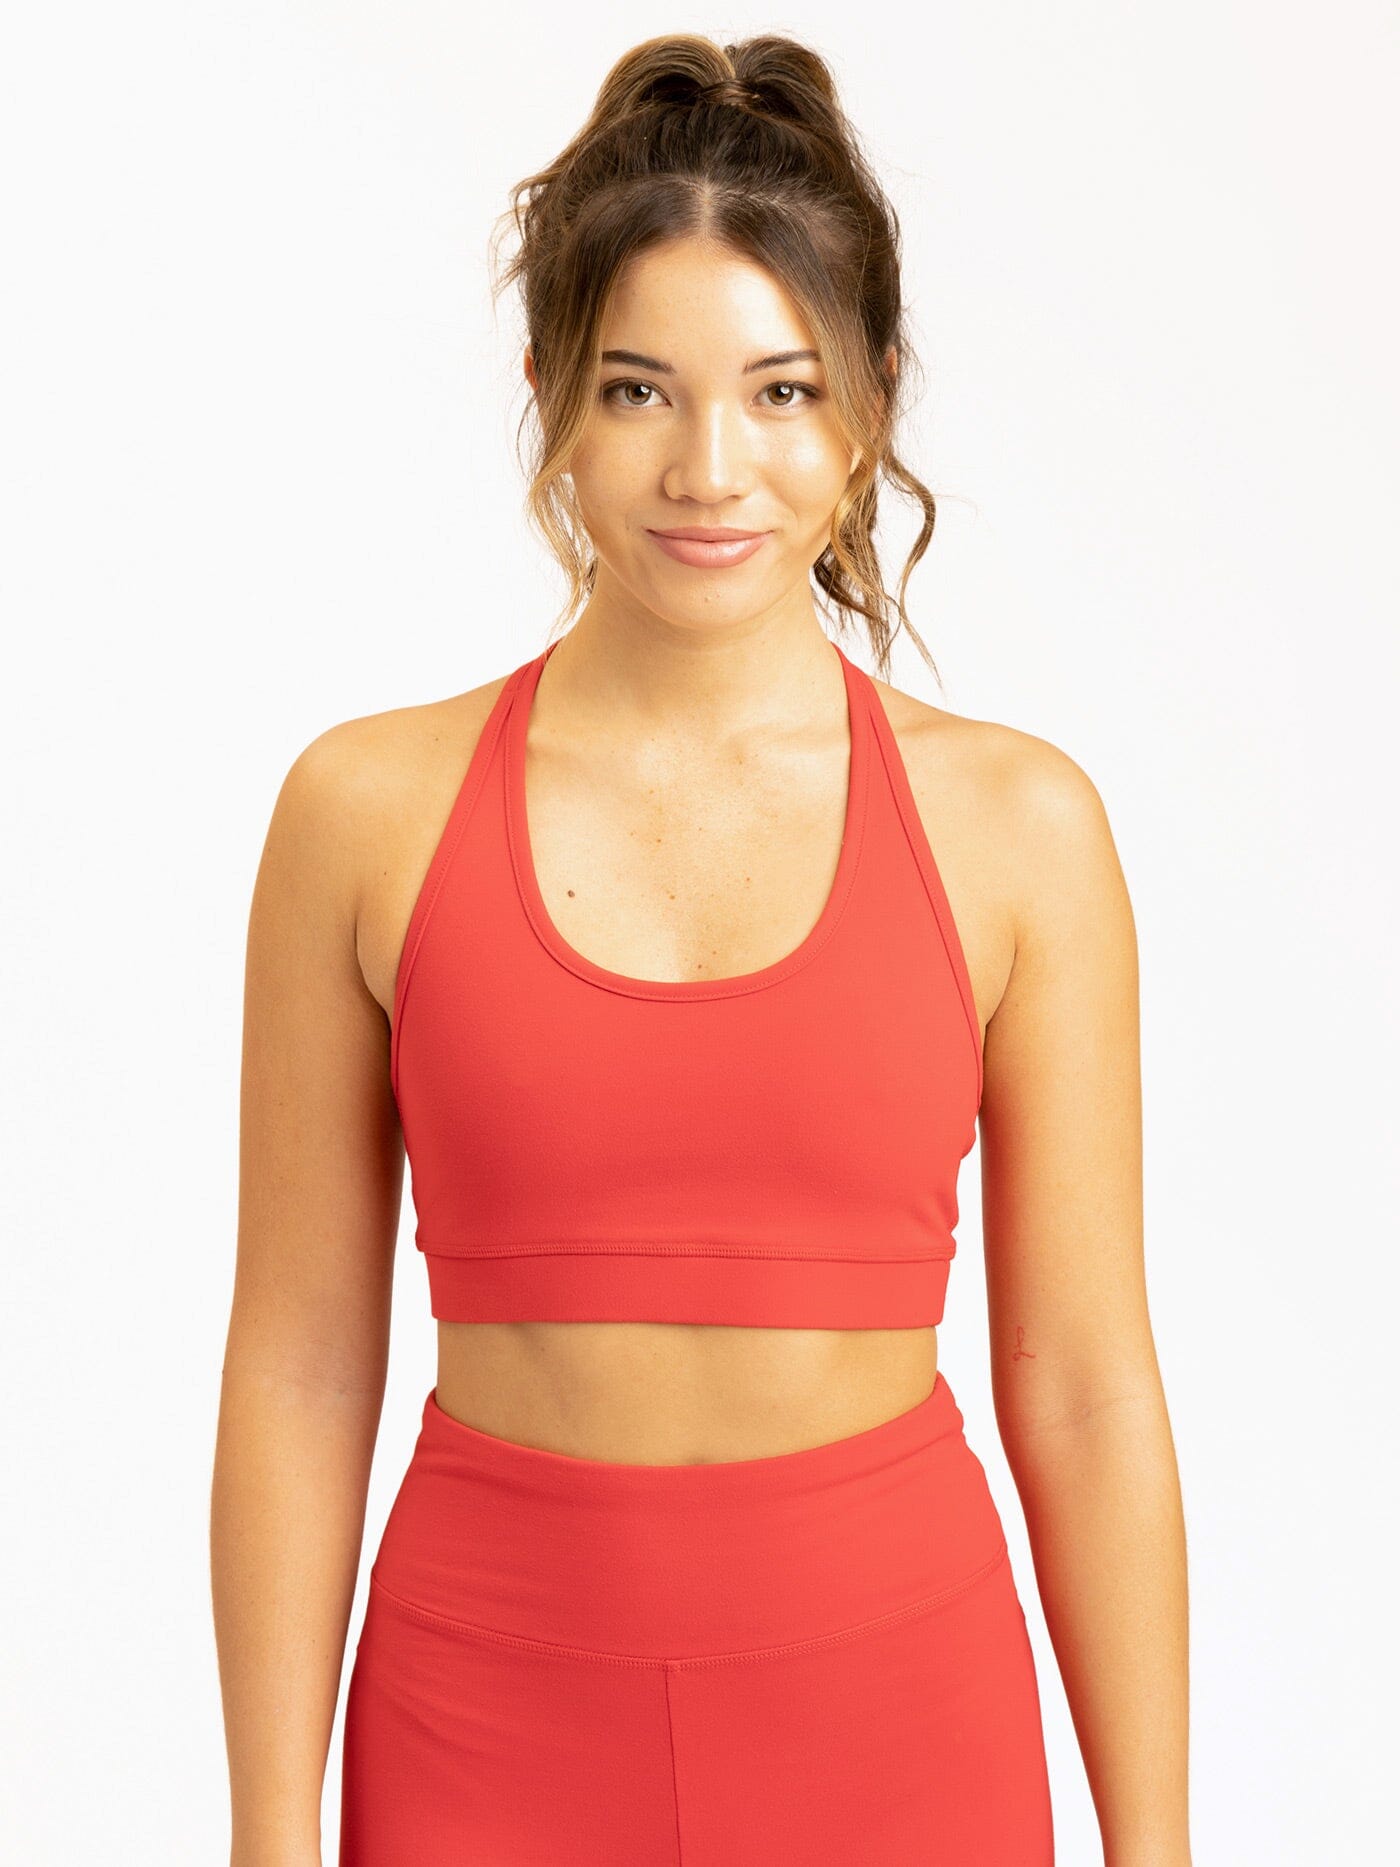 Sports Bras For Teens Widened Shoulder Straps S Red